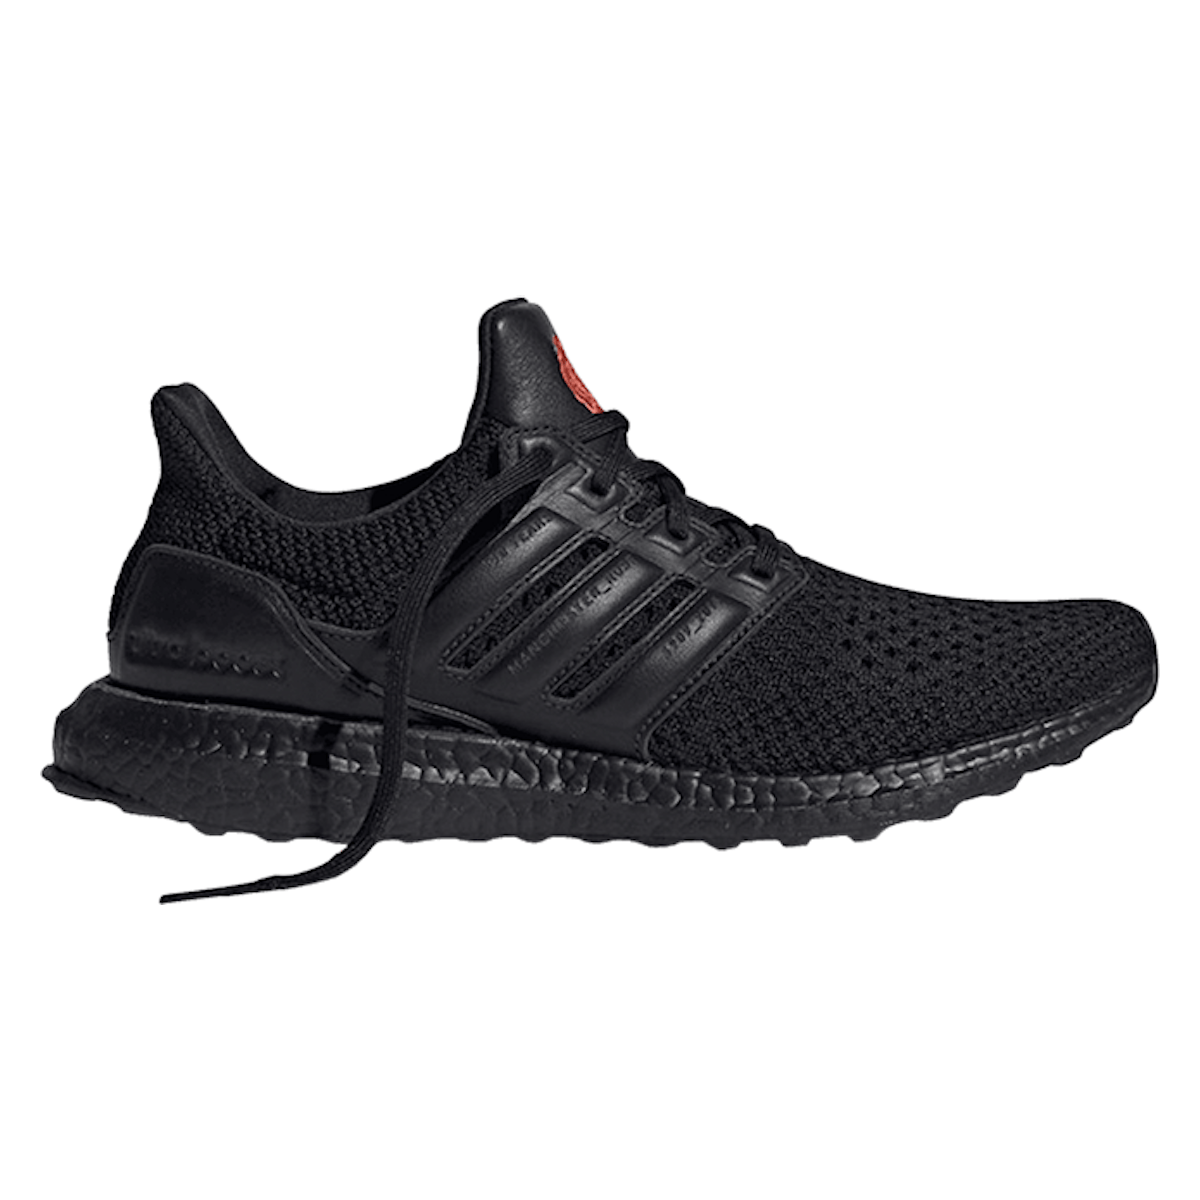 Adidas Ultra Boost 1.0 "Manchester Rose"